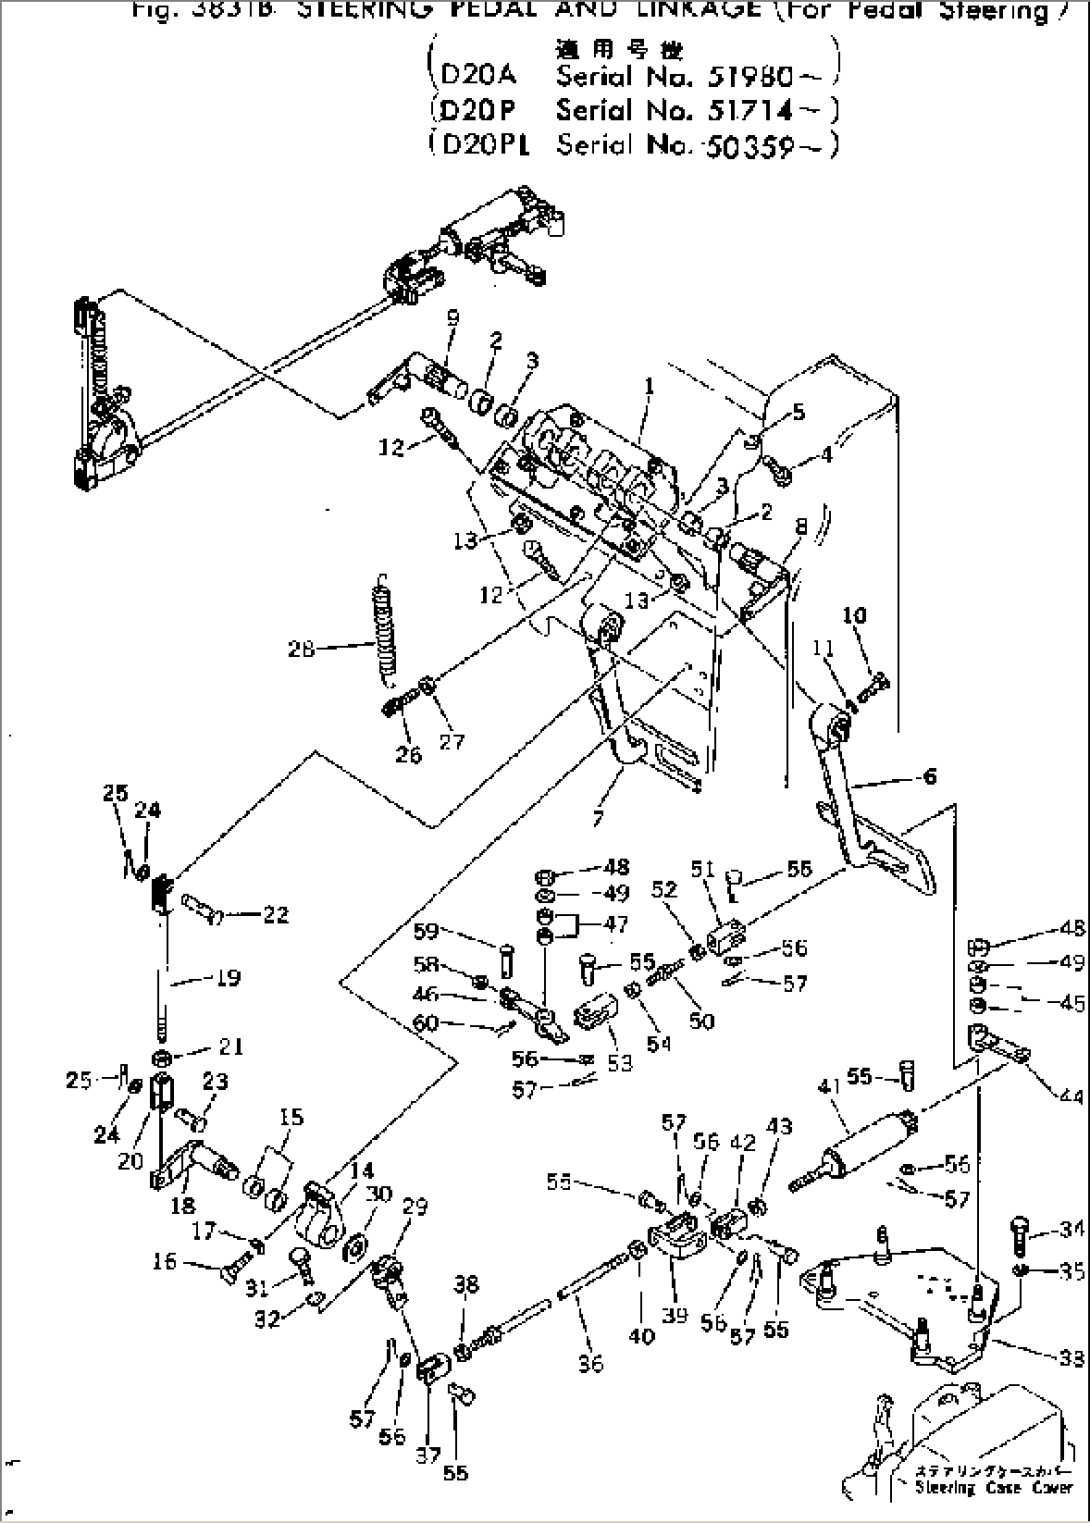 STEERING PEDAL AND LINKAGE (FOR PEDAL STEERING)(#51980-)